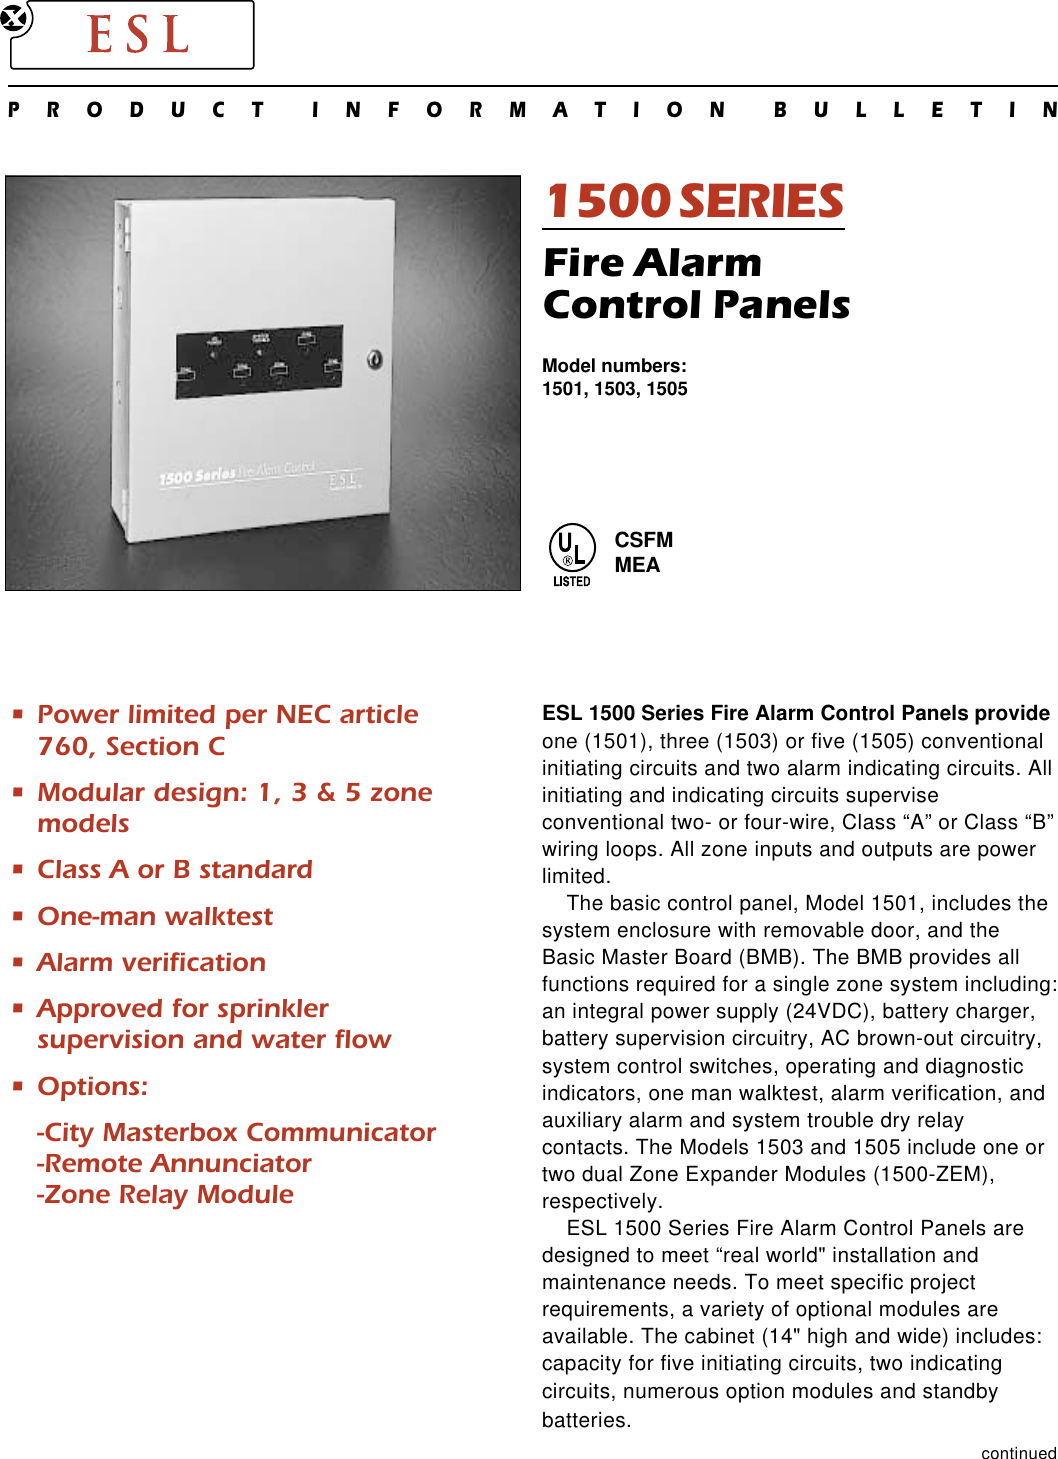 Page 1 of 4 - ESL 1500 Series Fire Alarm Control Panel Data Sheet 2001